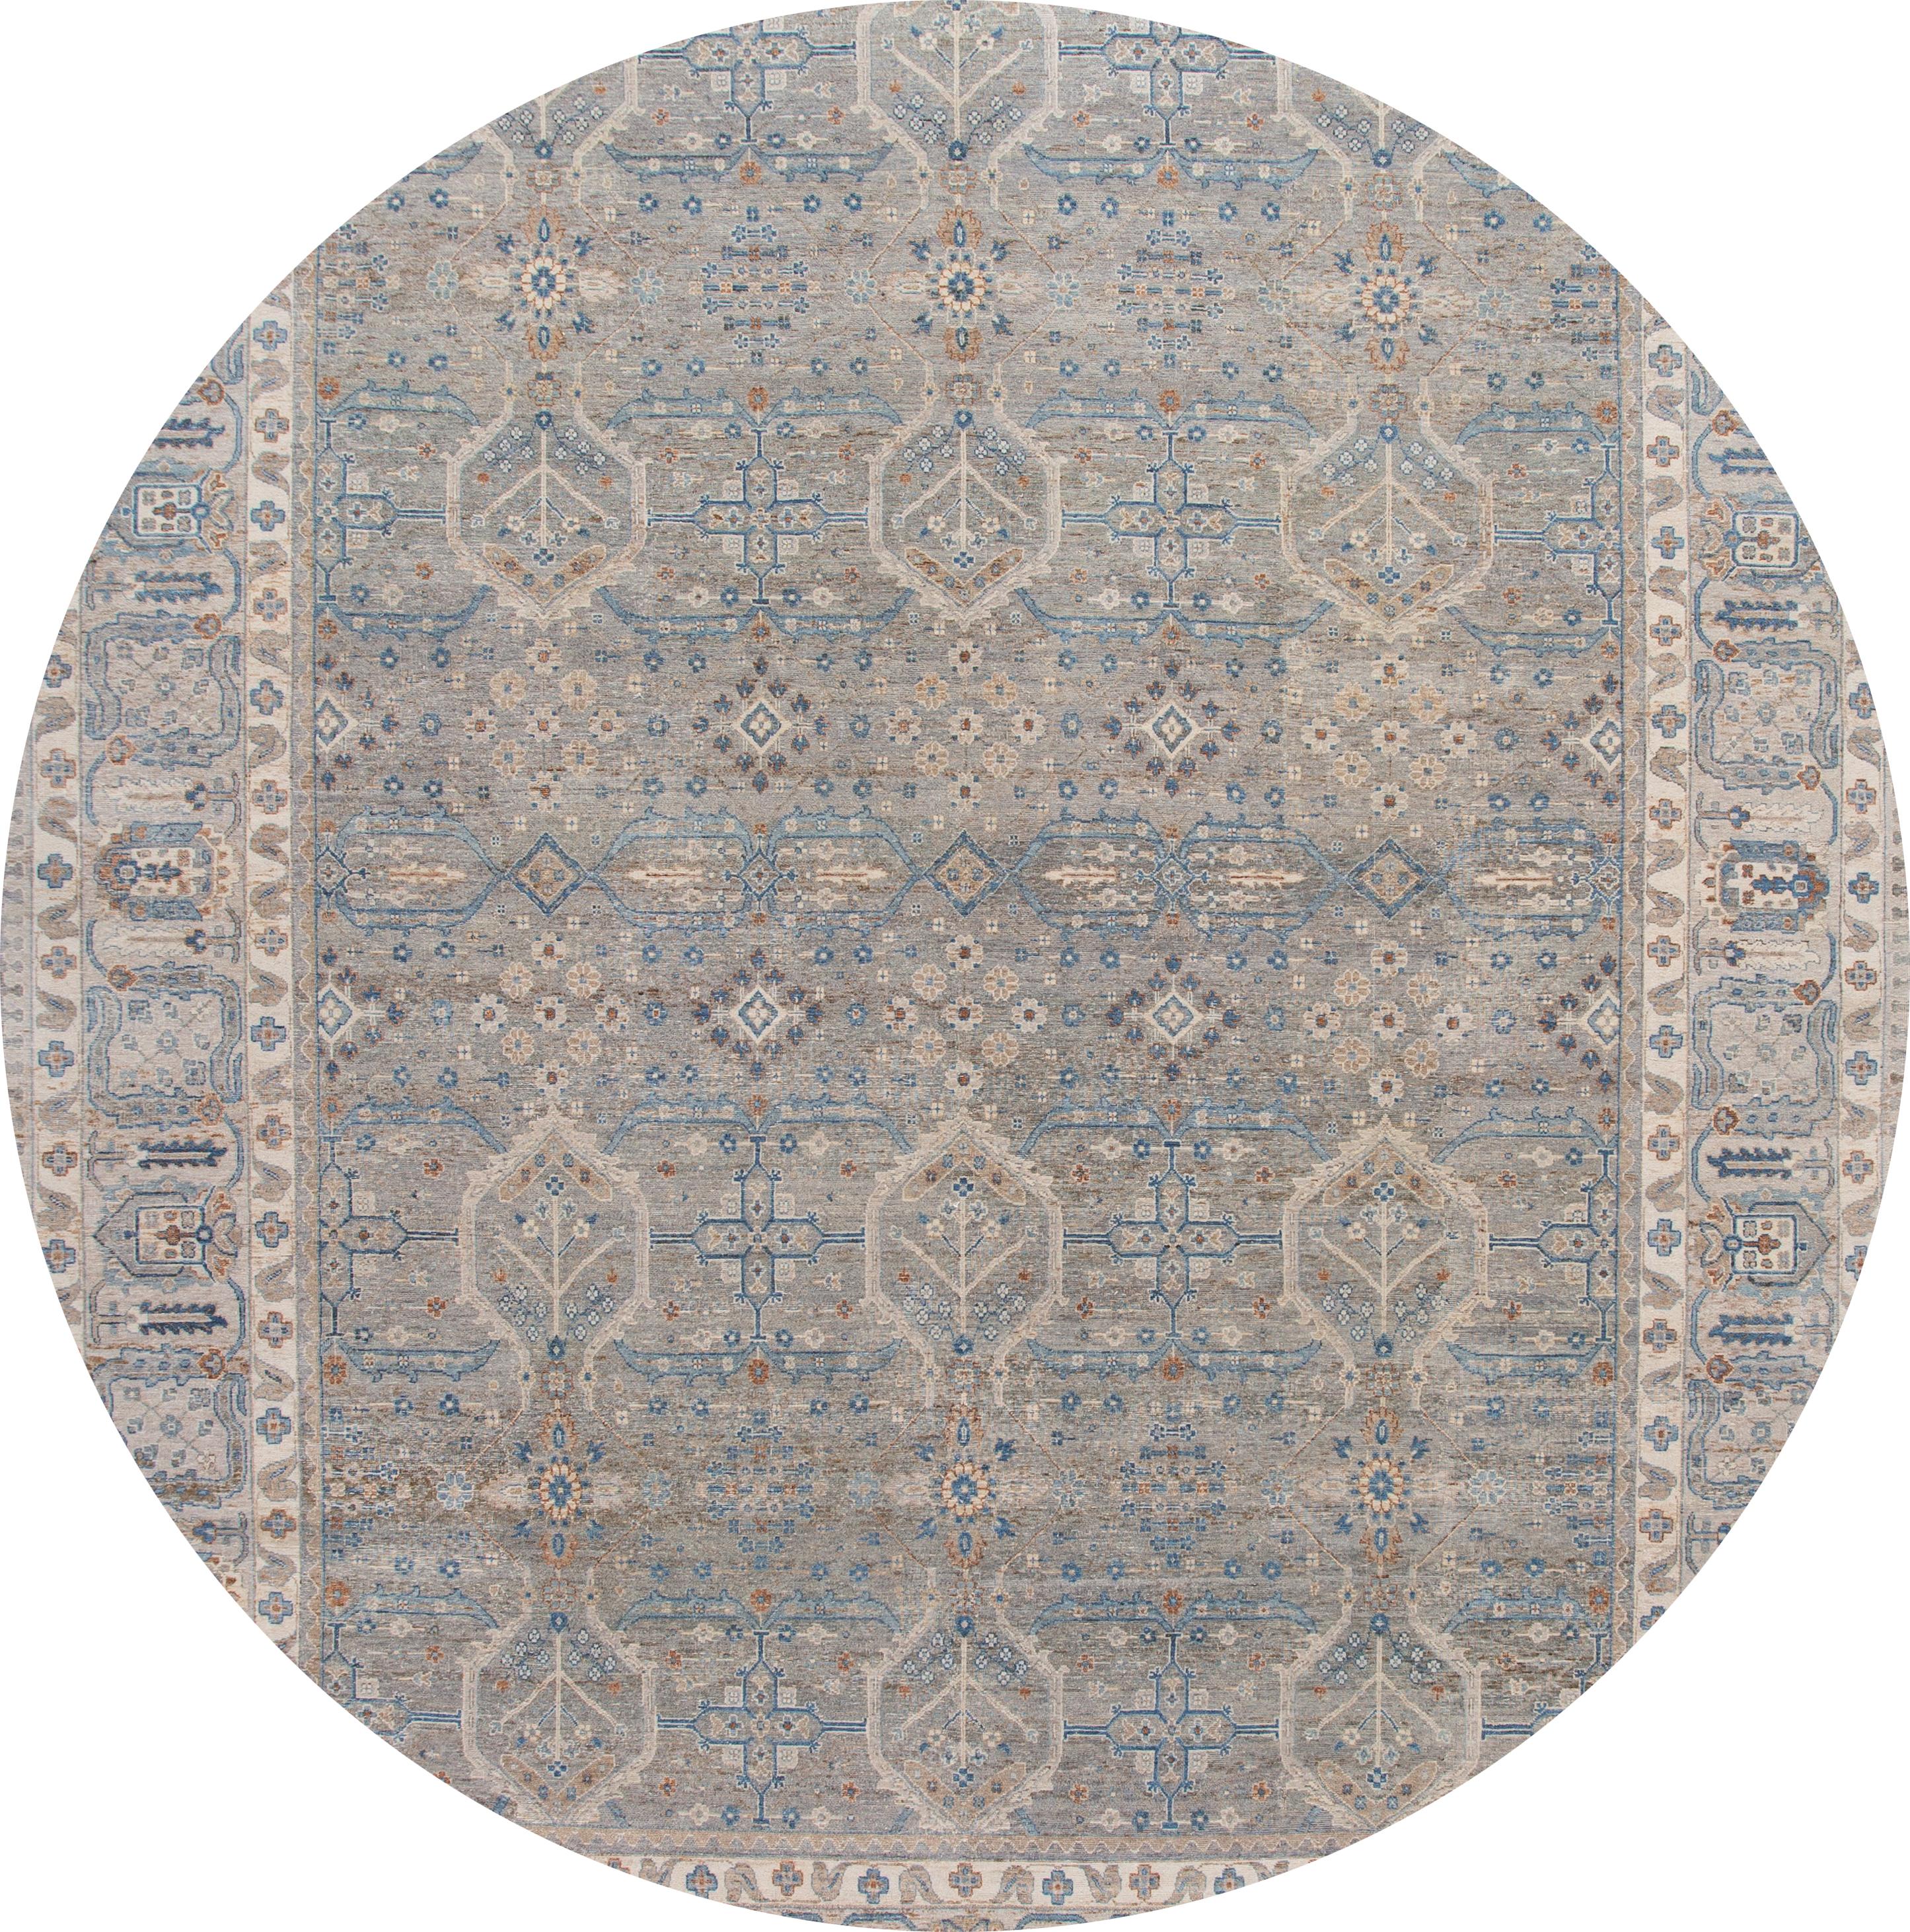 Beautiful modern hand knotted Indian wool rug with a gray field, blue, brown, and ivory accents with an all-over geometric design.

This rug measures: 11'11